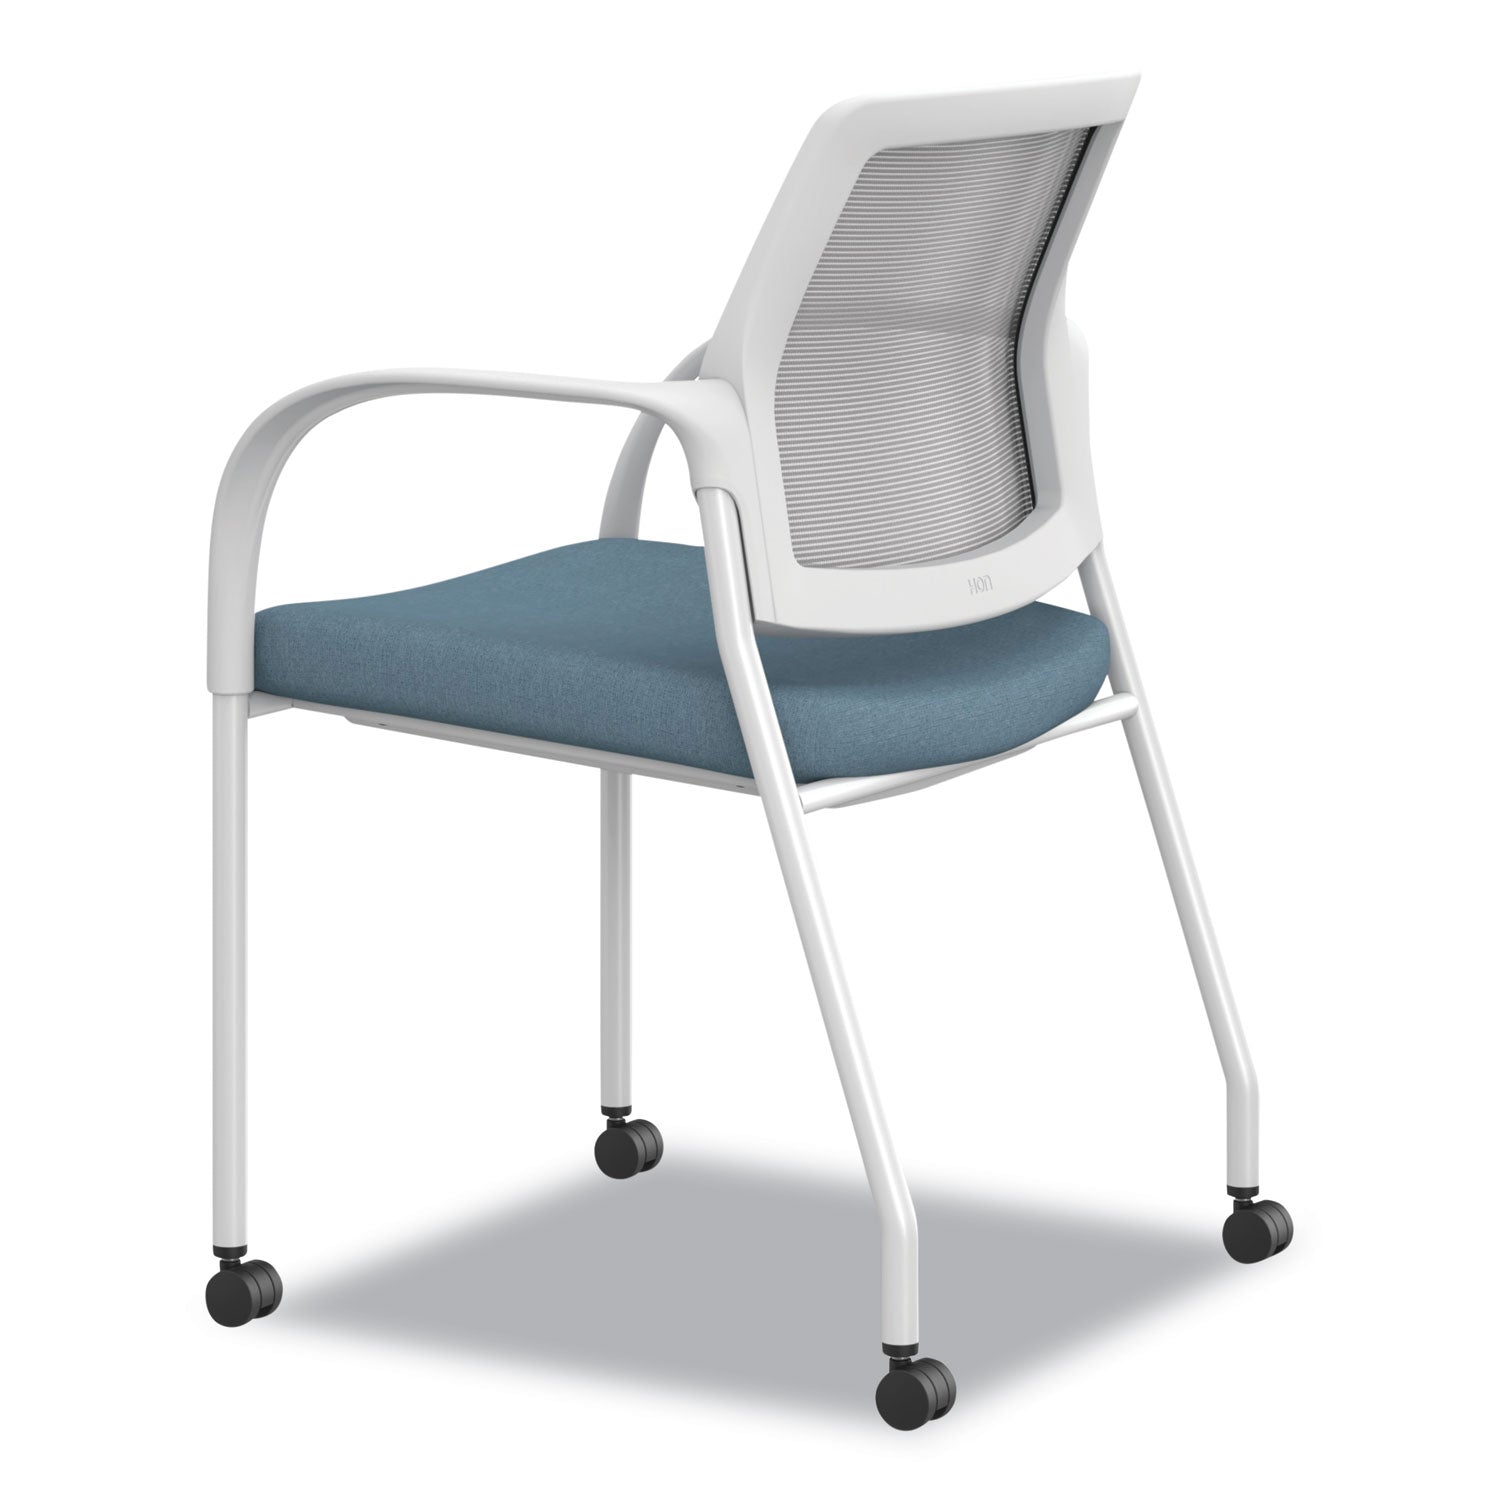 ignition-series-mesh-back-mobile-stacking-chair-fabric-seat-25-x-2175-x-335-carolina-fog-white-ships-in-7-10-bus-days_honi2s6fhfl21k7 - 4